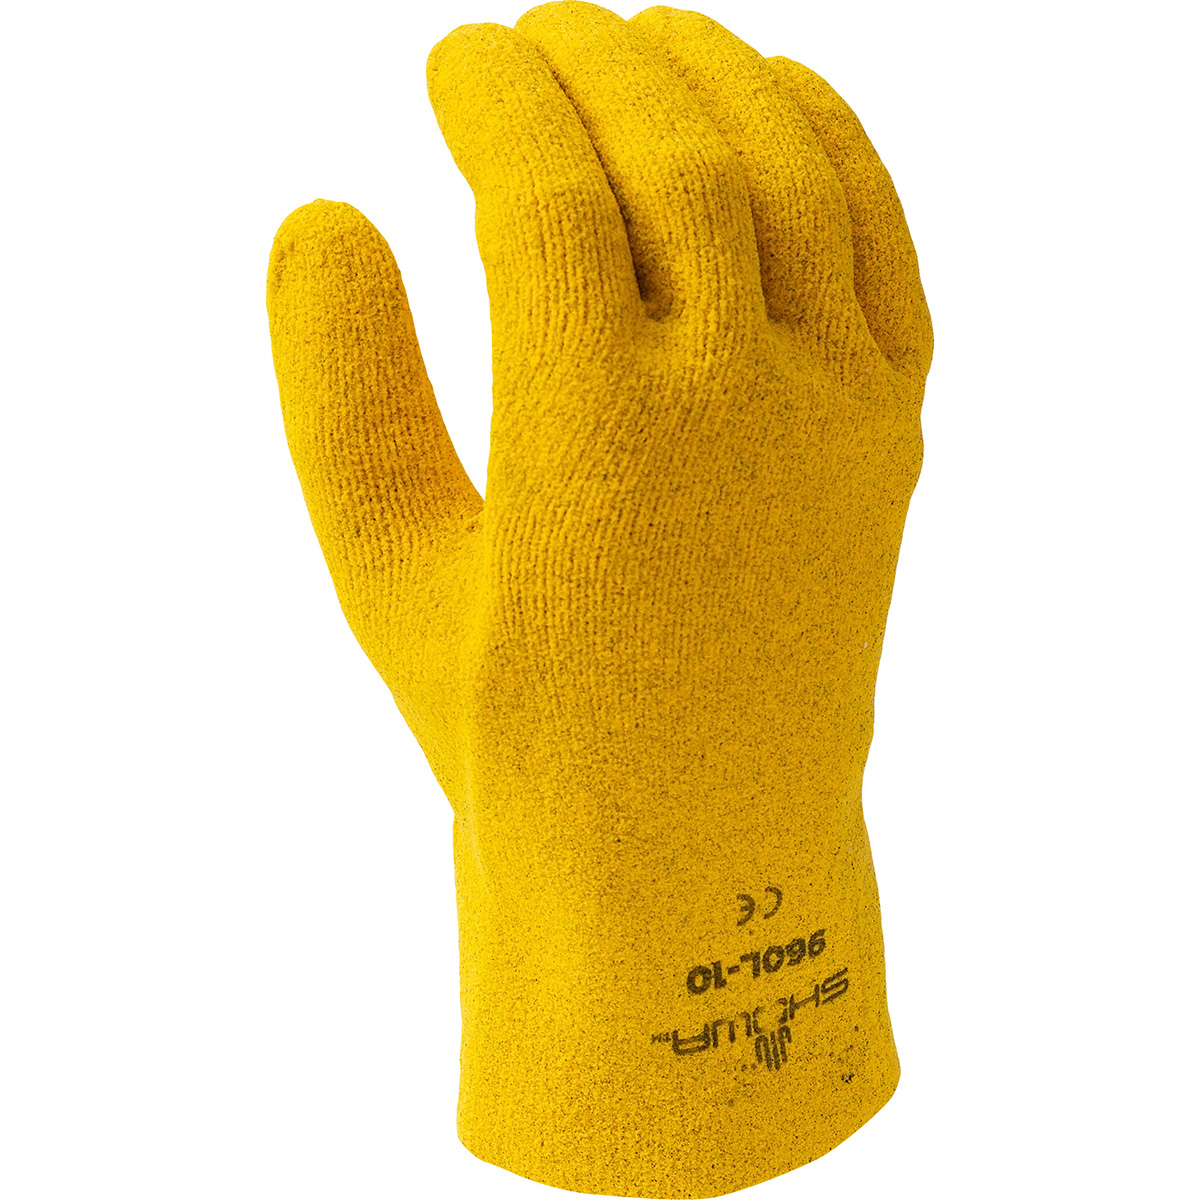 General purpose PVC fully coated, yellow, seam-free liner, slip-on, extra large